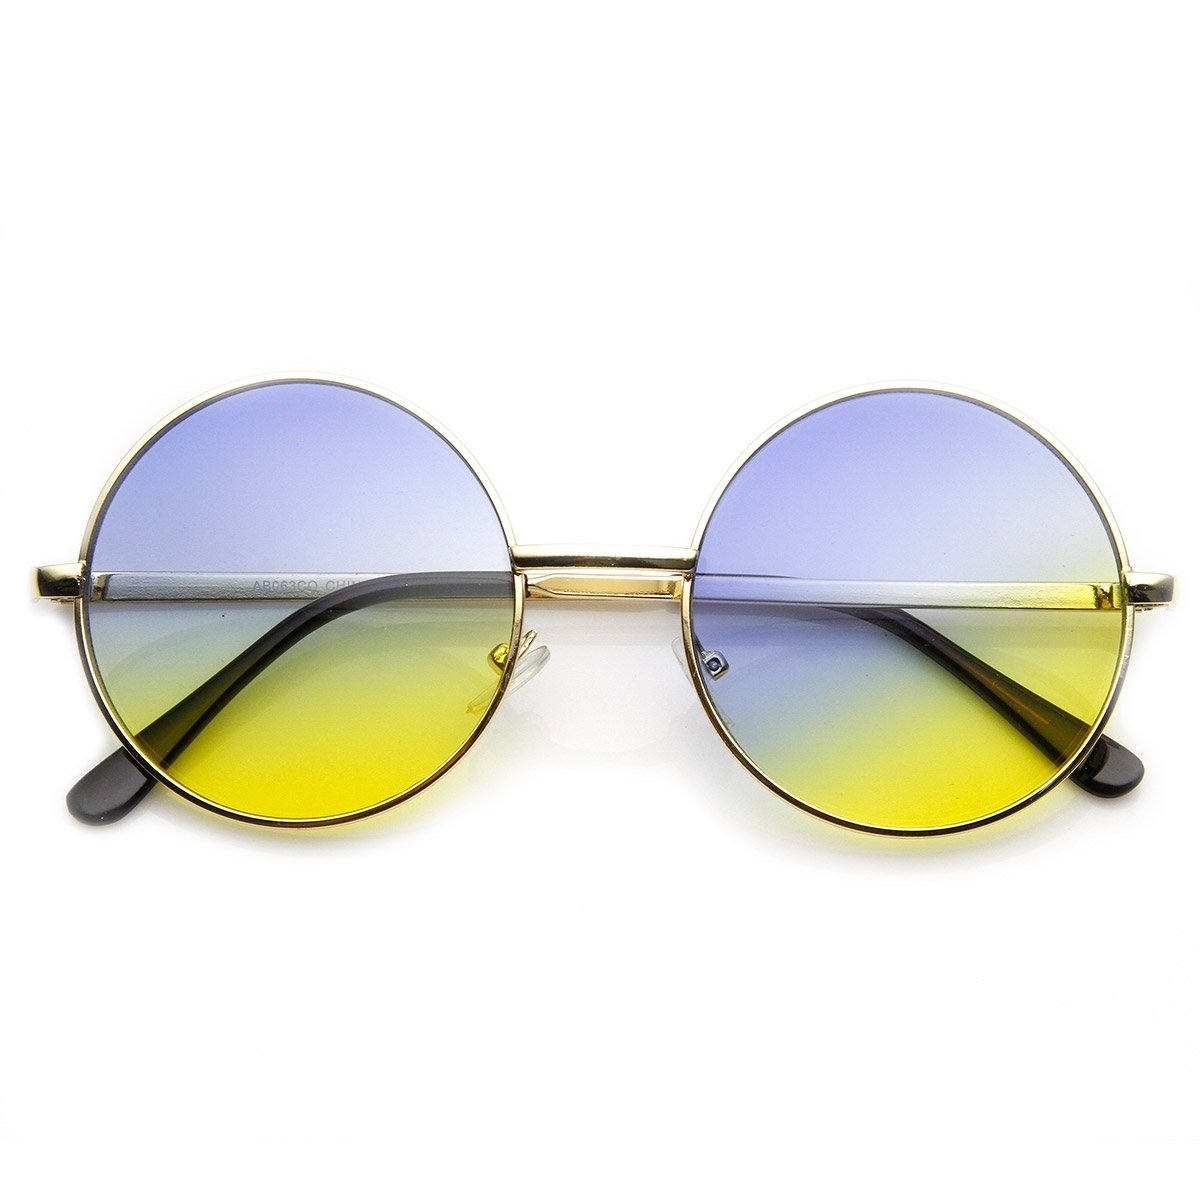 Mid Sized Metal Lennon Style Color Tinted Round Sunglasses - Gold Pink-Blue